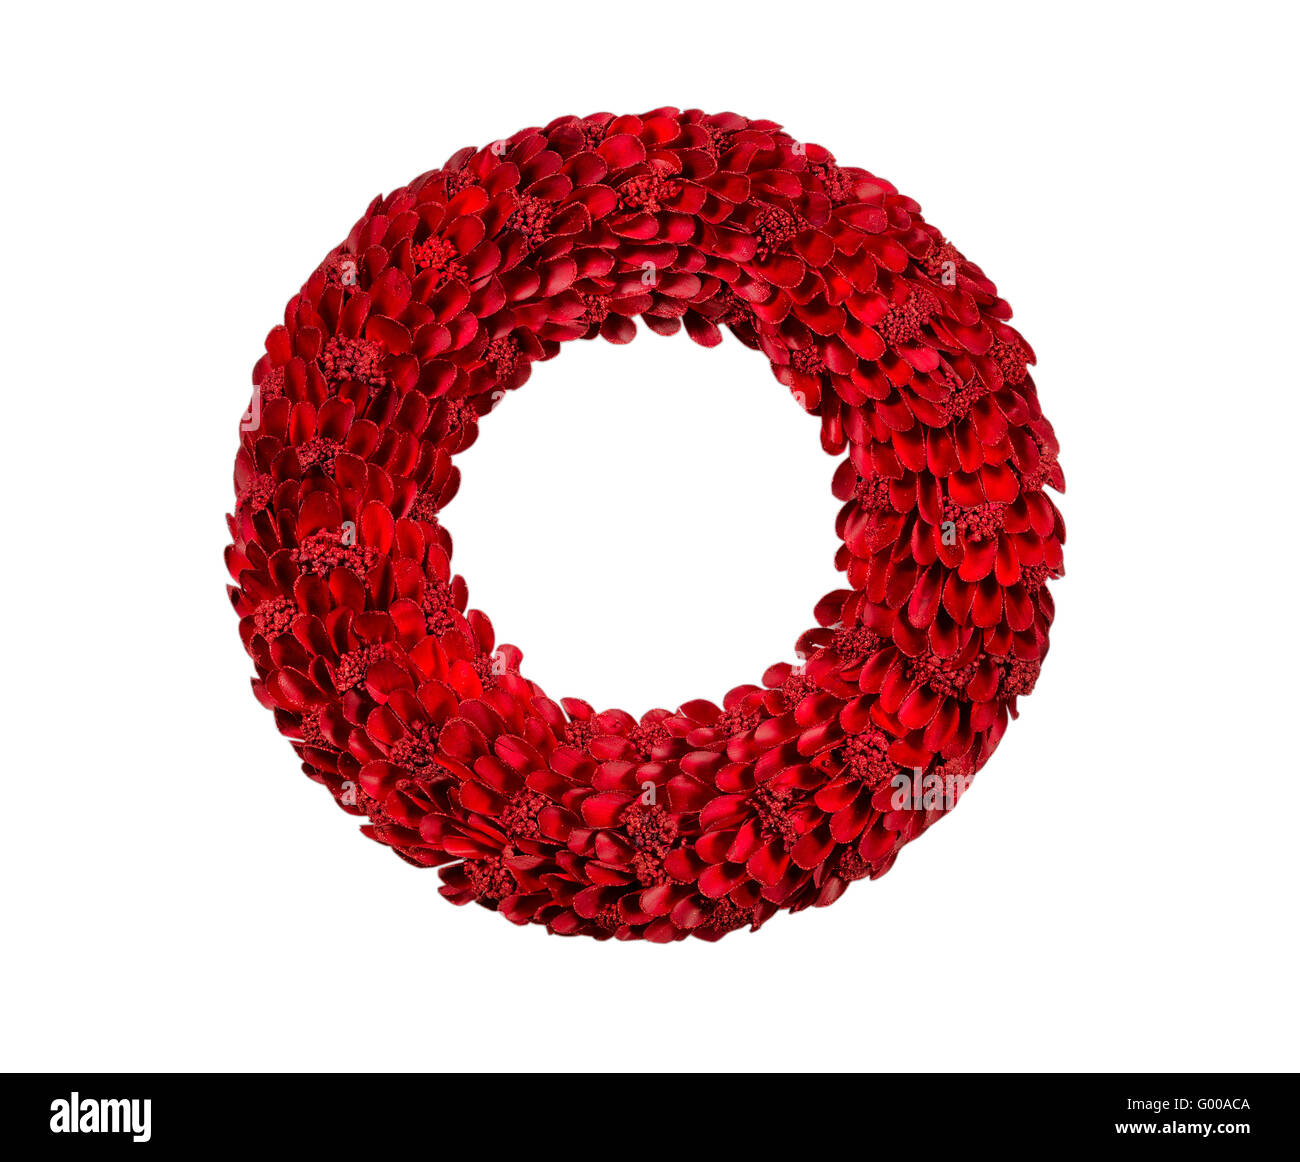 Bright Red Holiday Wreath on White Stock Photo